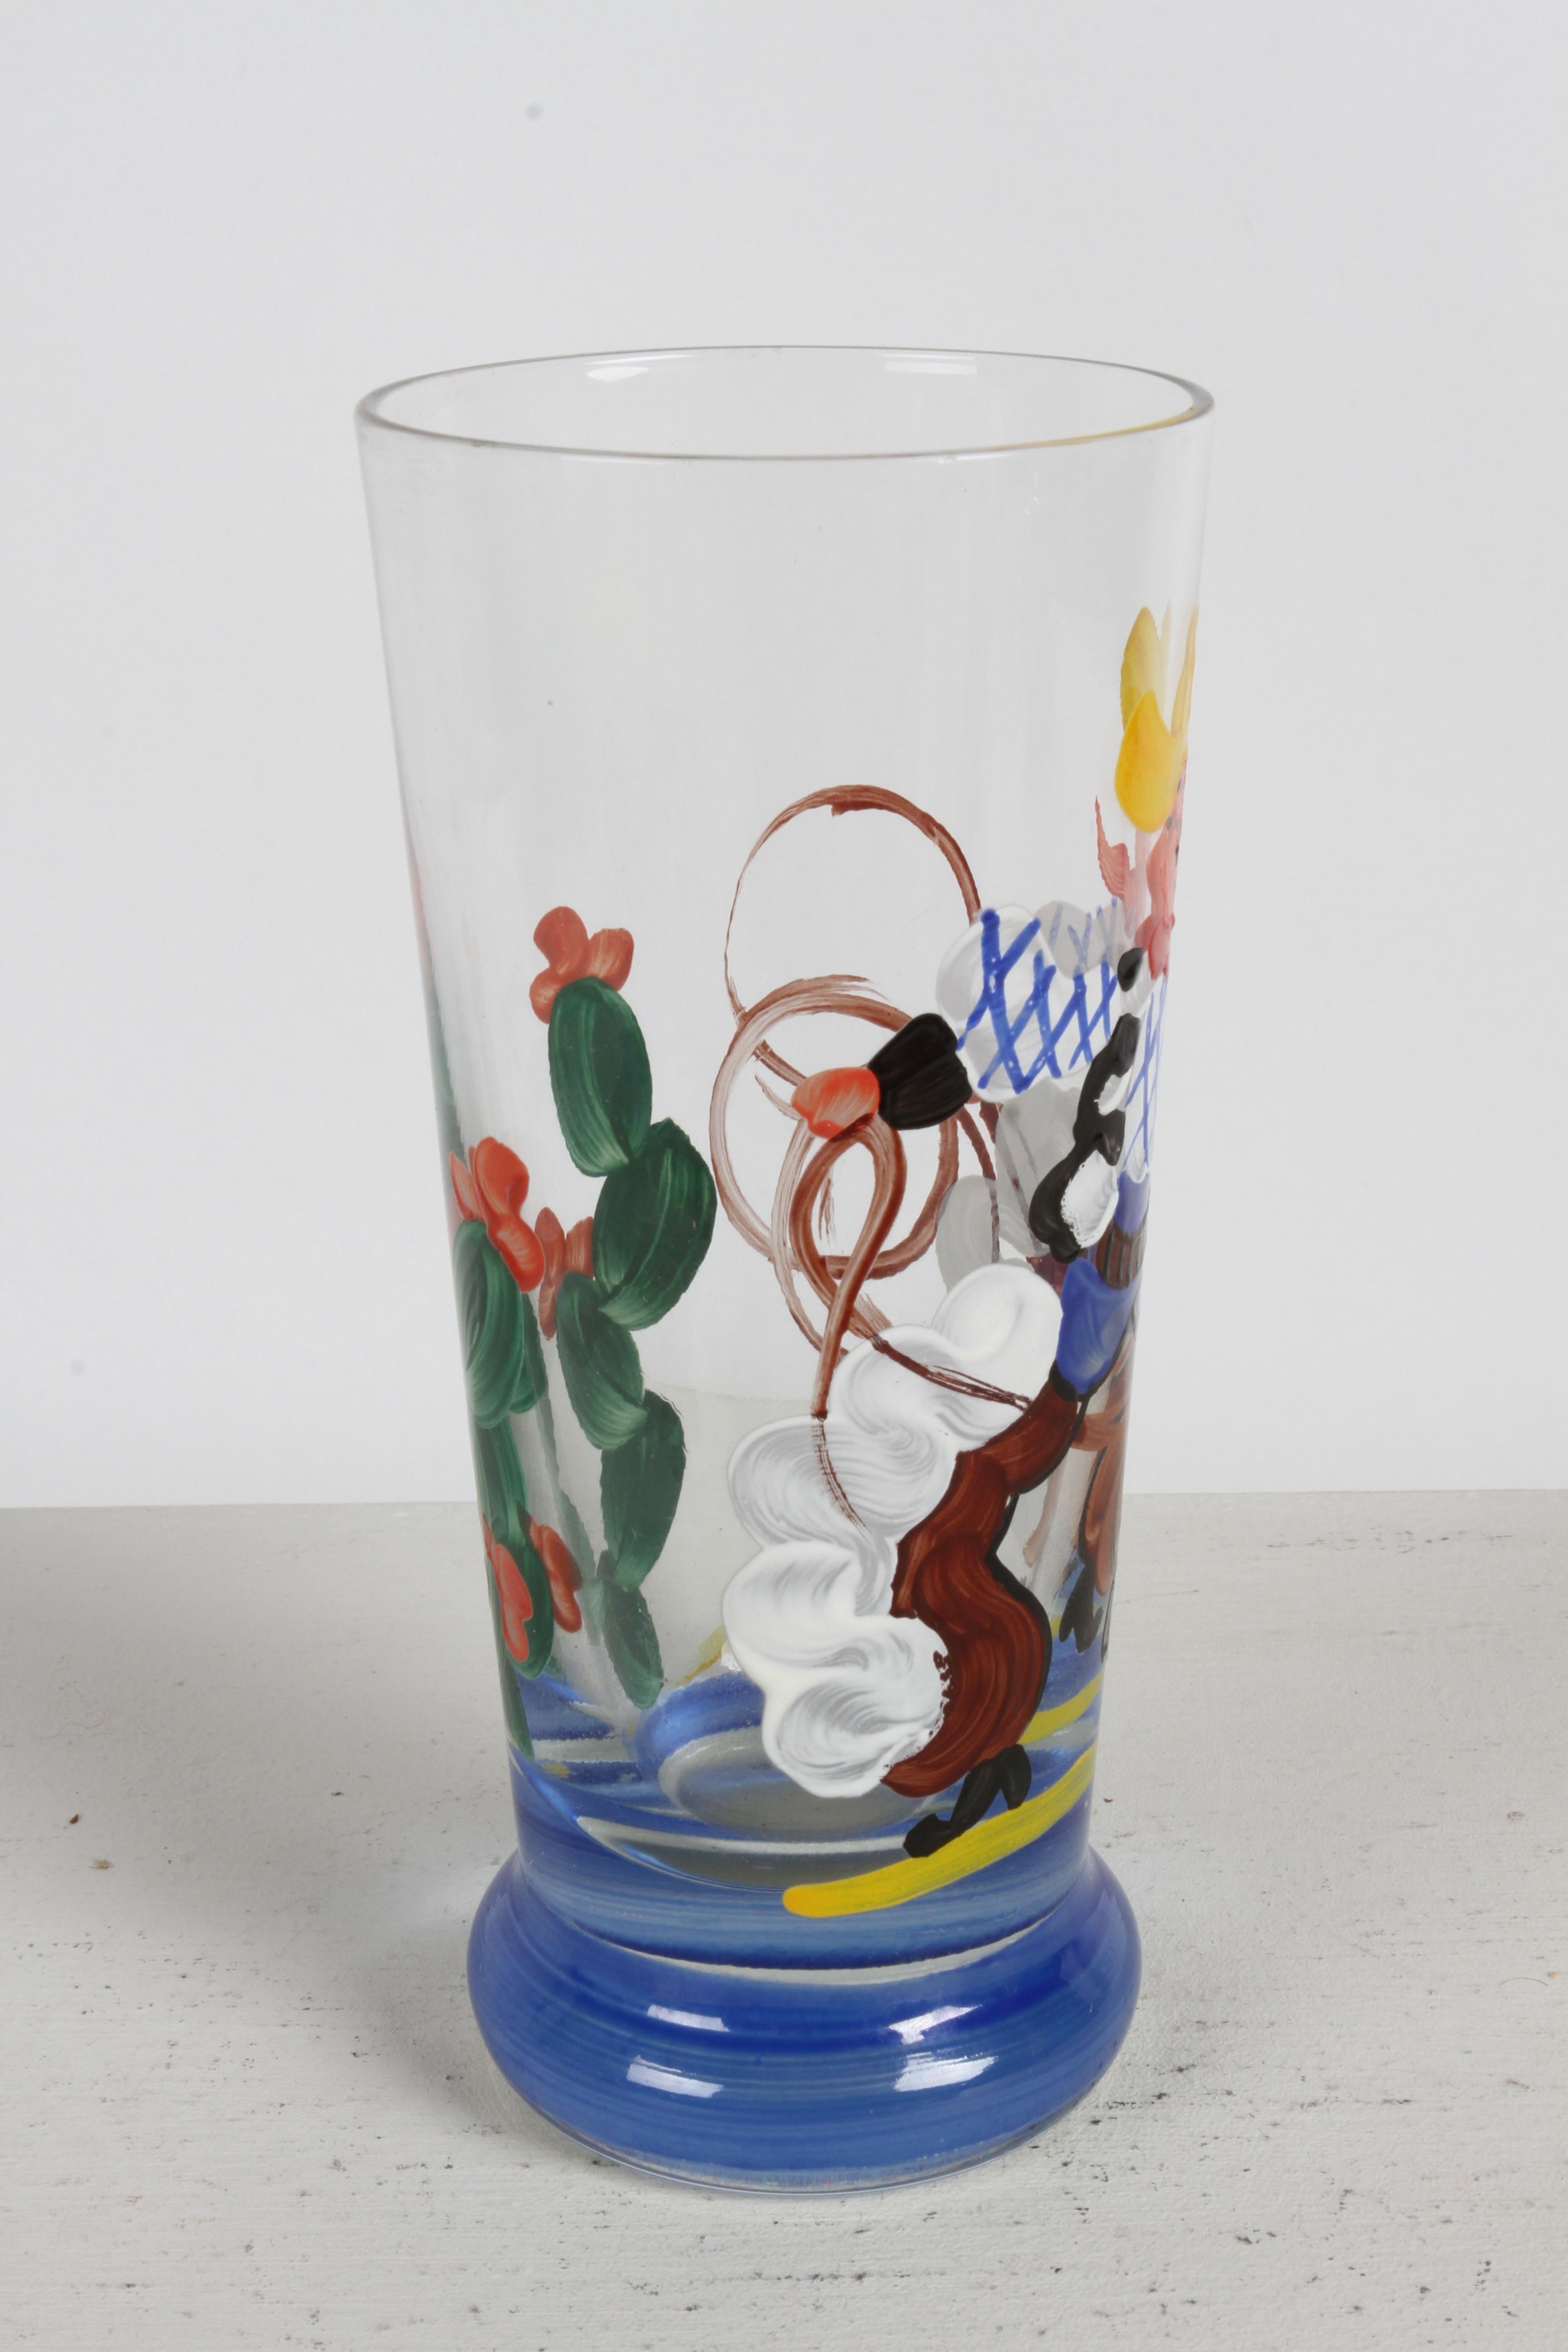 1940s Artist Hand-Painted Bar Glasses with Cowboy, Lasso & Cactus Theme - Rita  For Sale 10